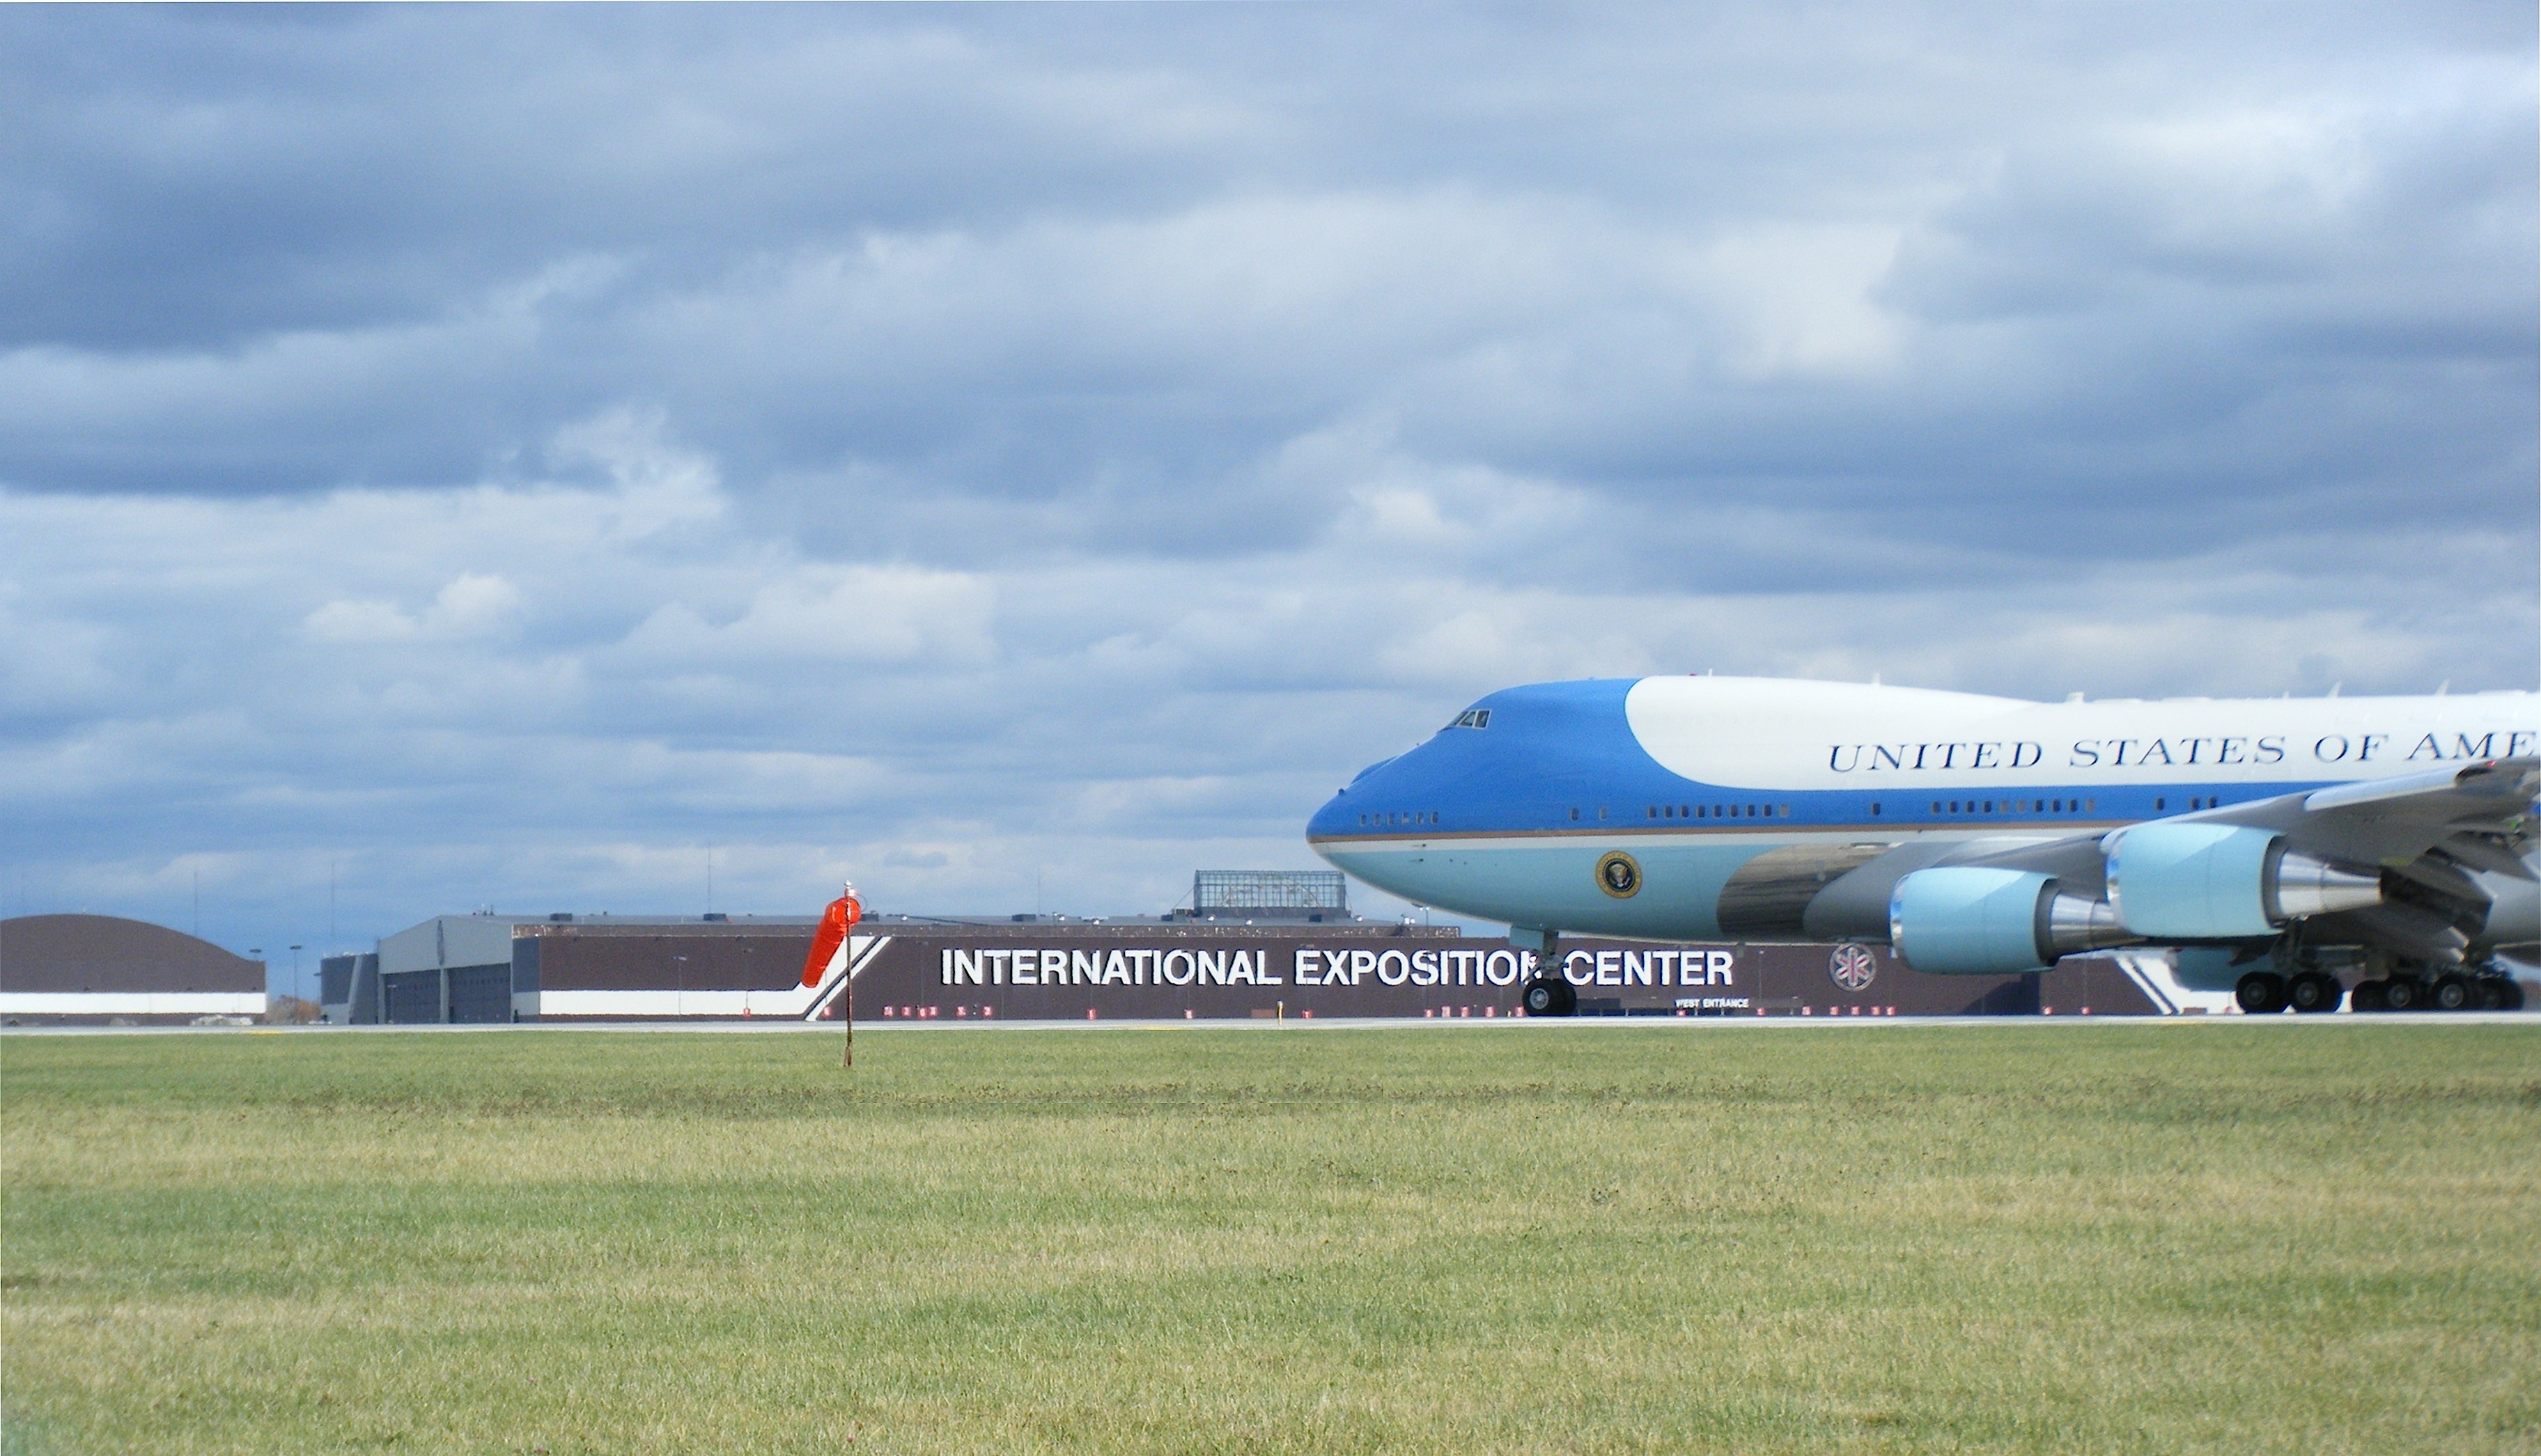 File:Air Force One Takeoff.JPG - Wikimedia Commons